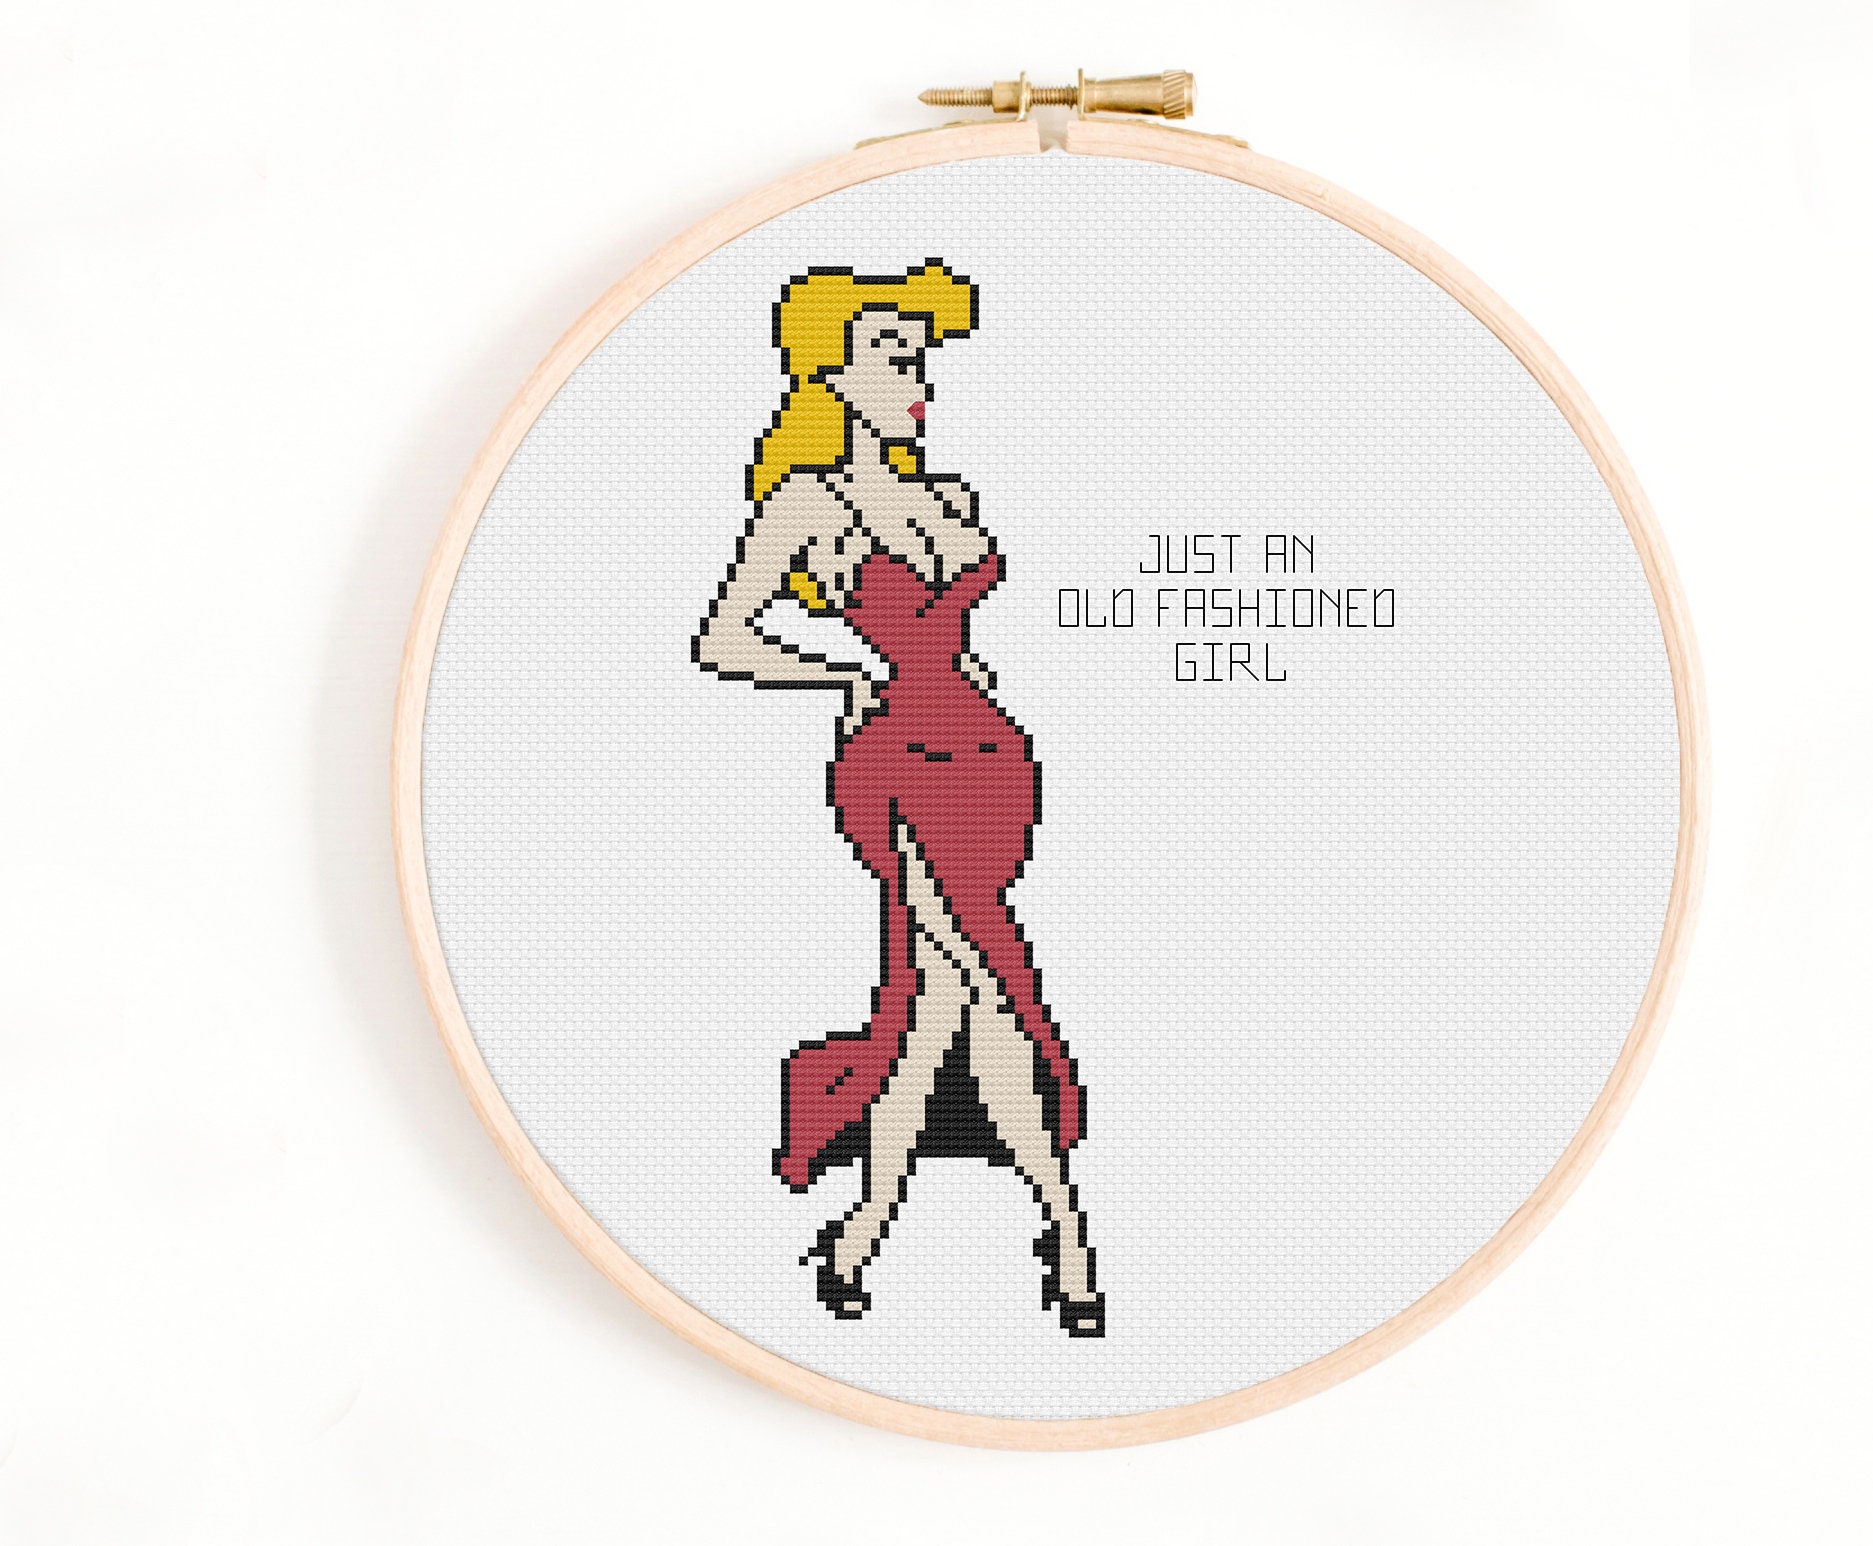 Vintage Retro Pin-Up Girl on Bed DIGITAL Counted Cross-Stitch Pattern Chart